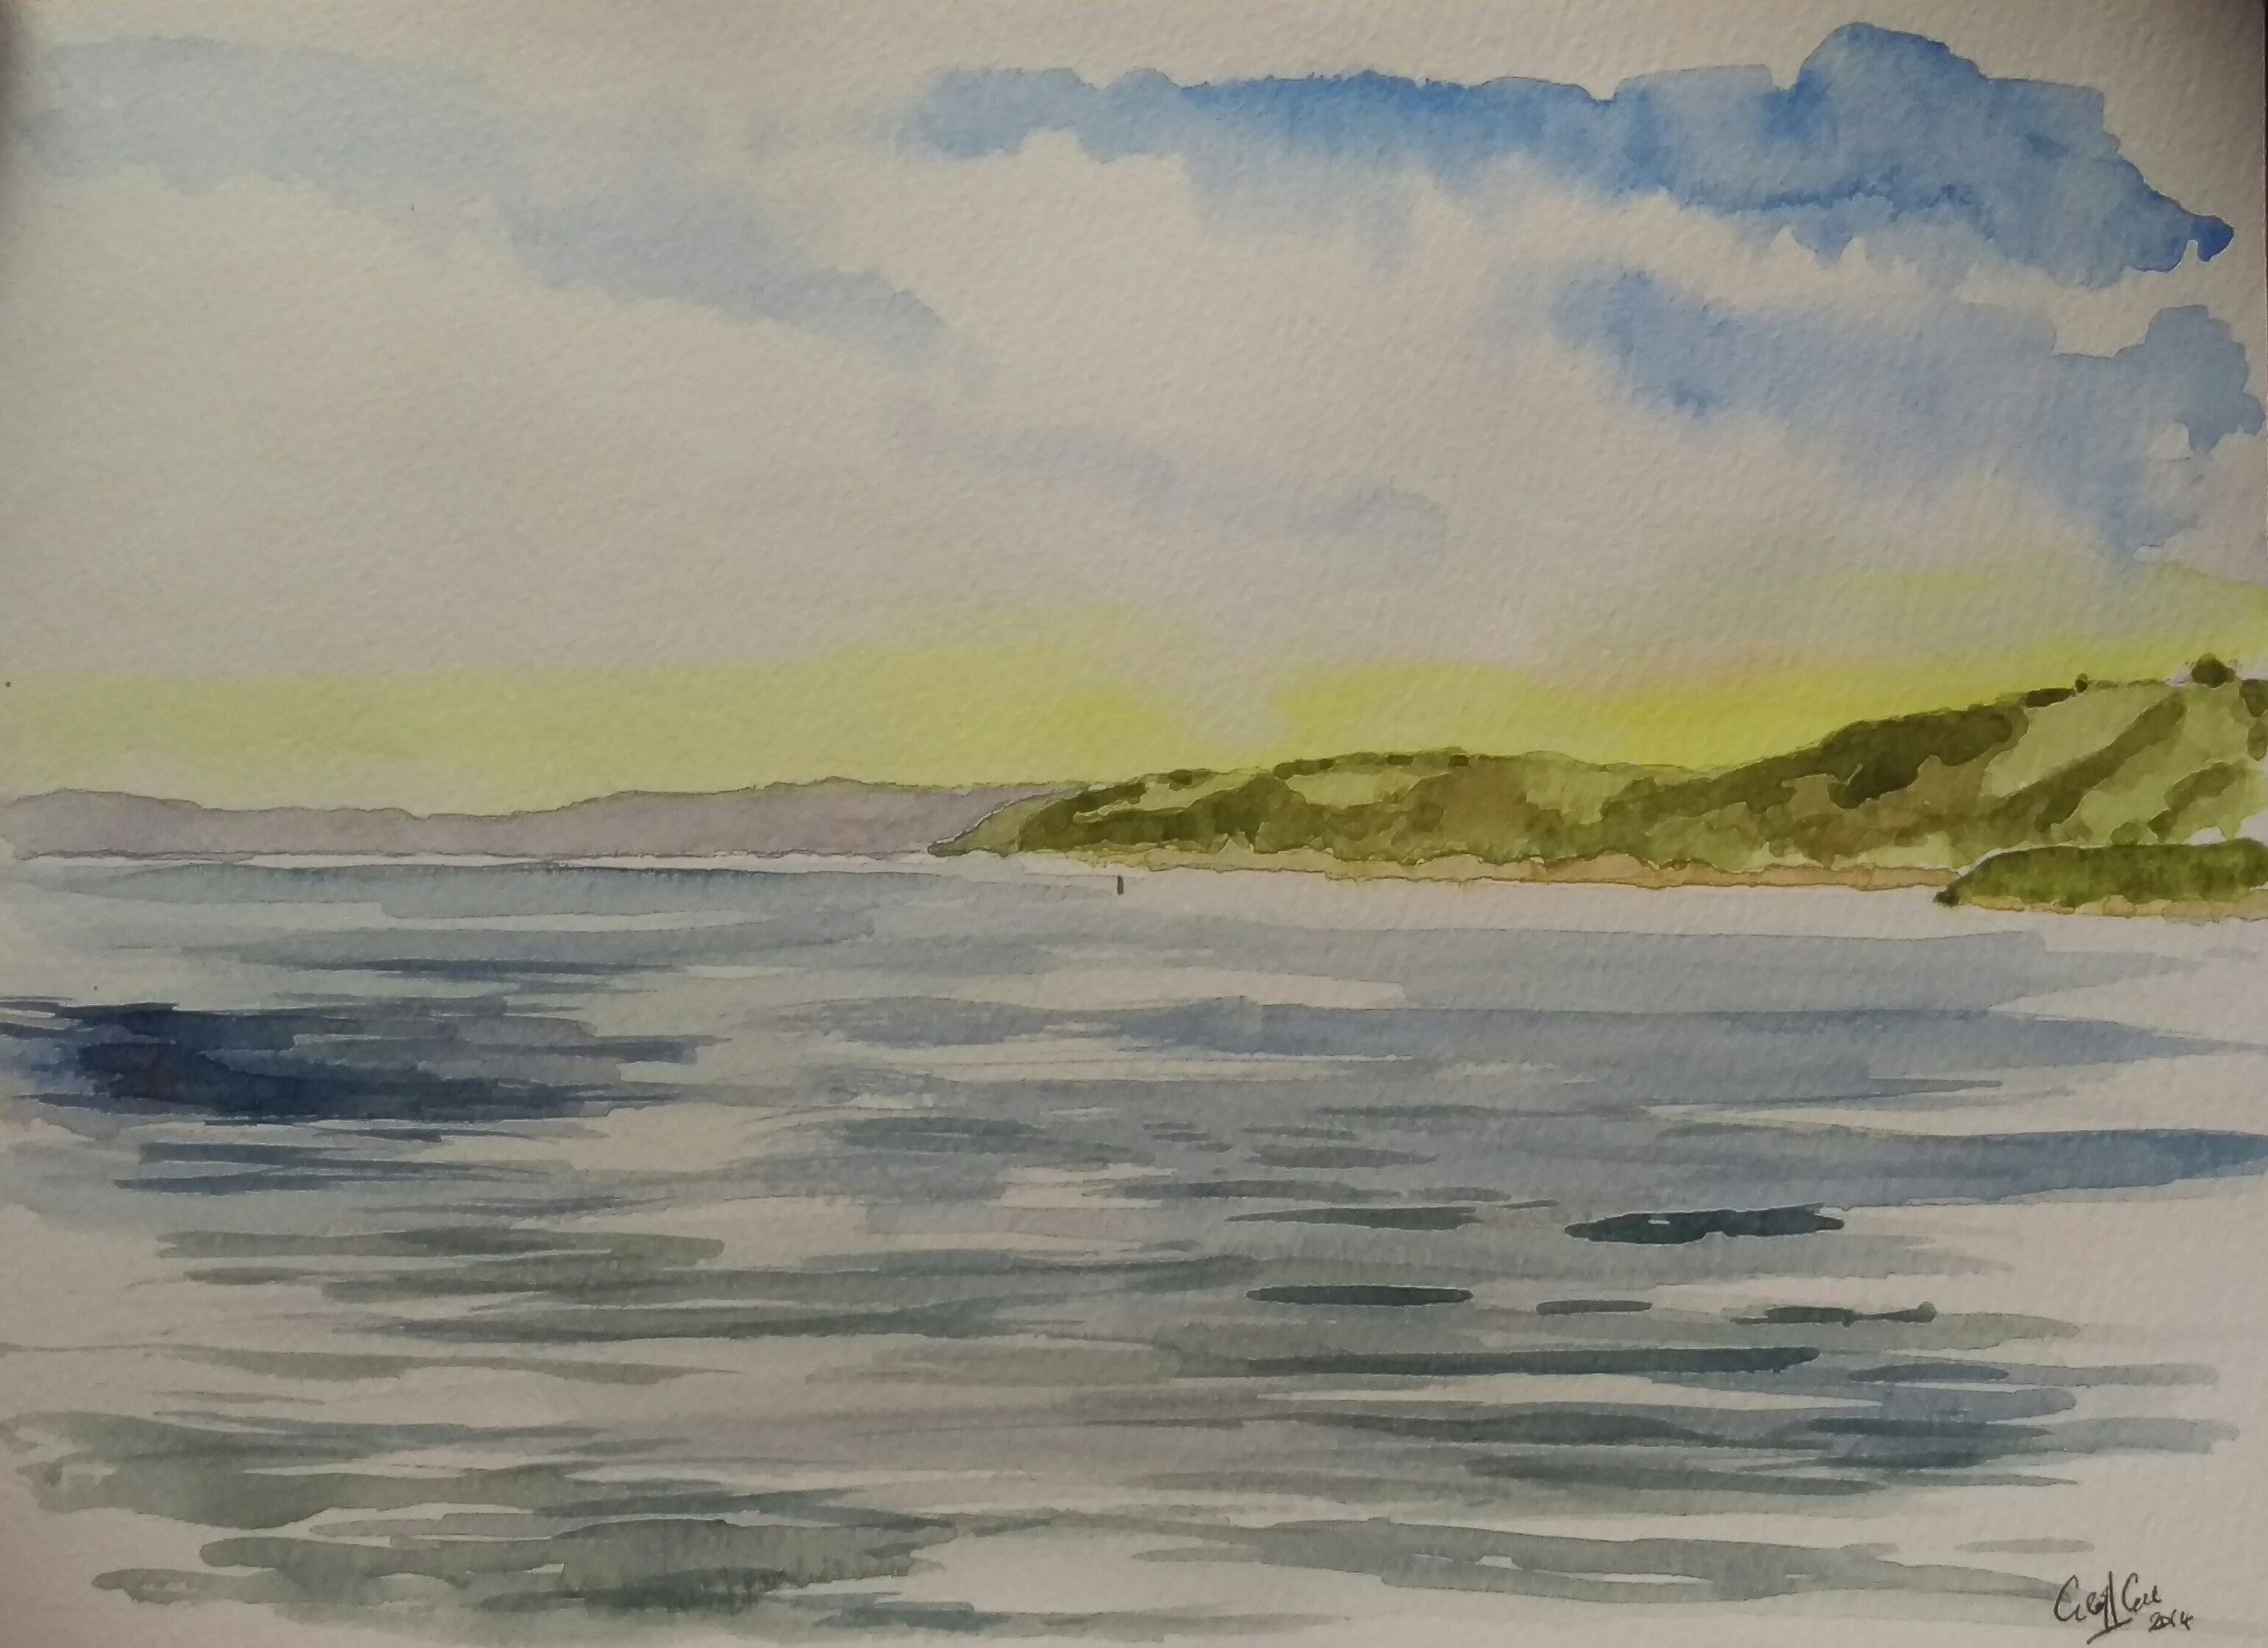 Watercolour  Unframed  Picture size - 12"x8"  Price - £20